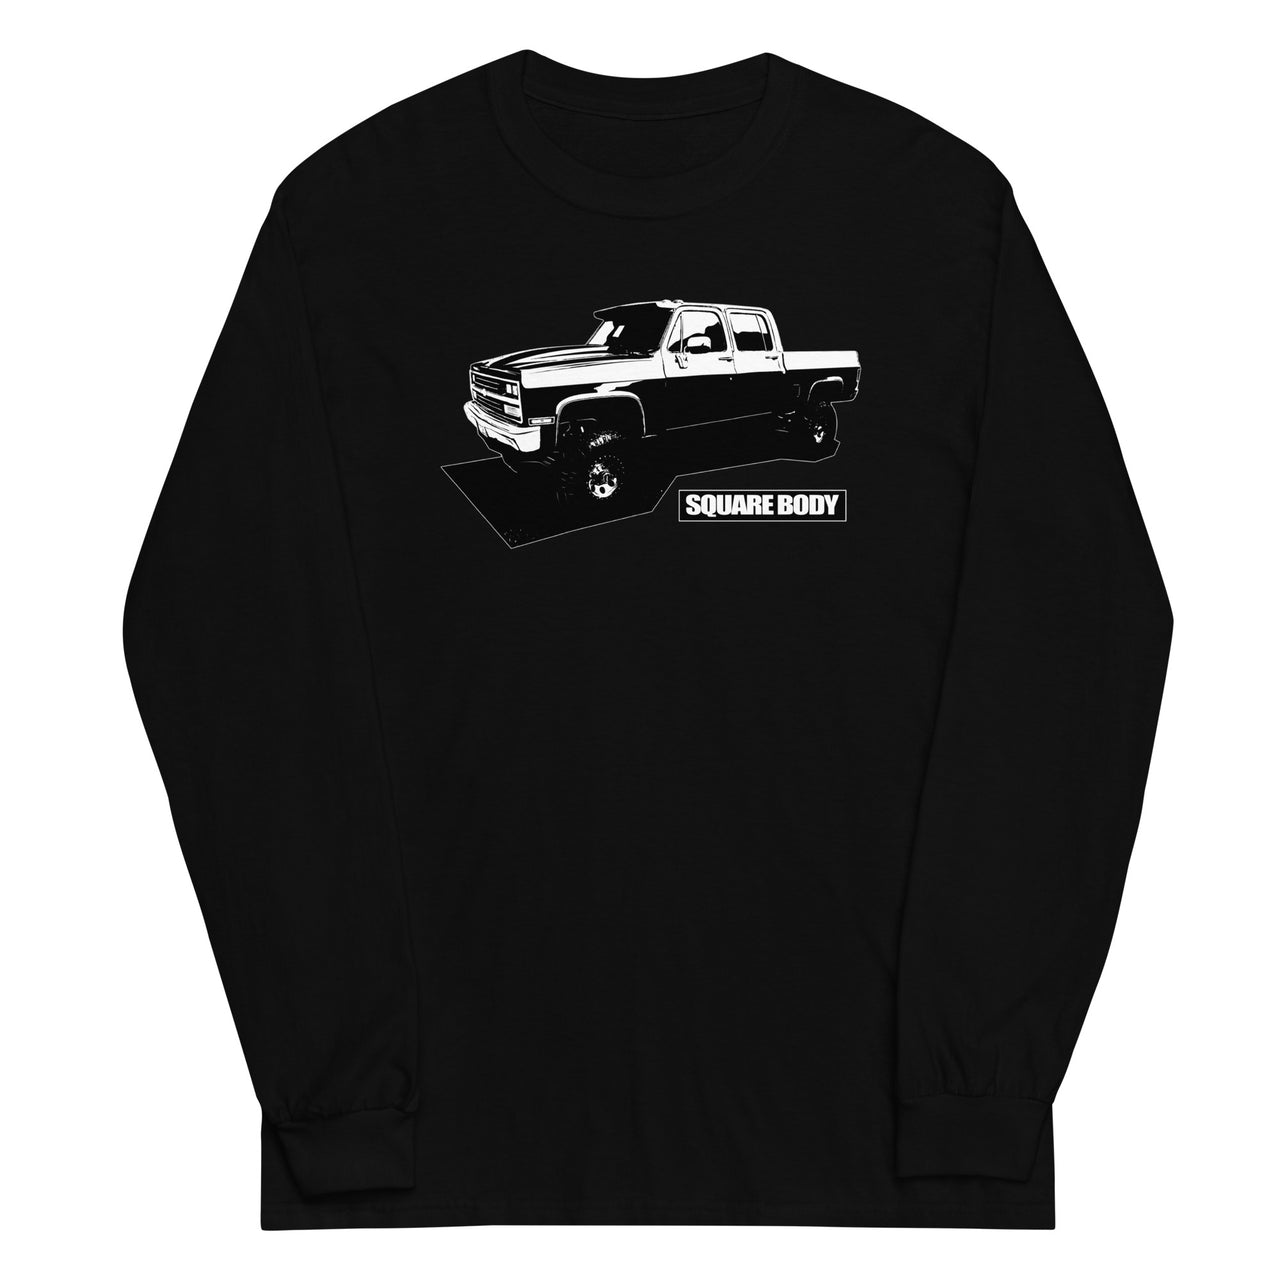 Crew Cab Square Body Truck Long Sleeve Shirt in black